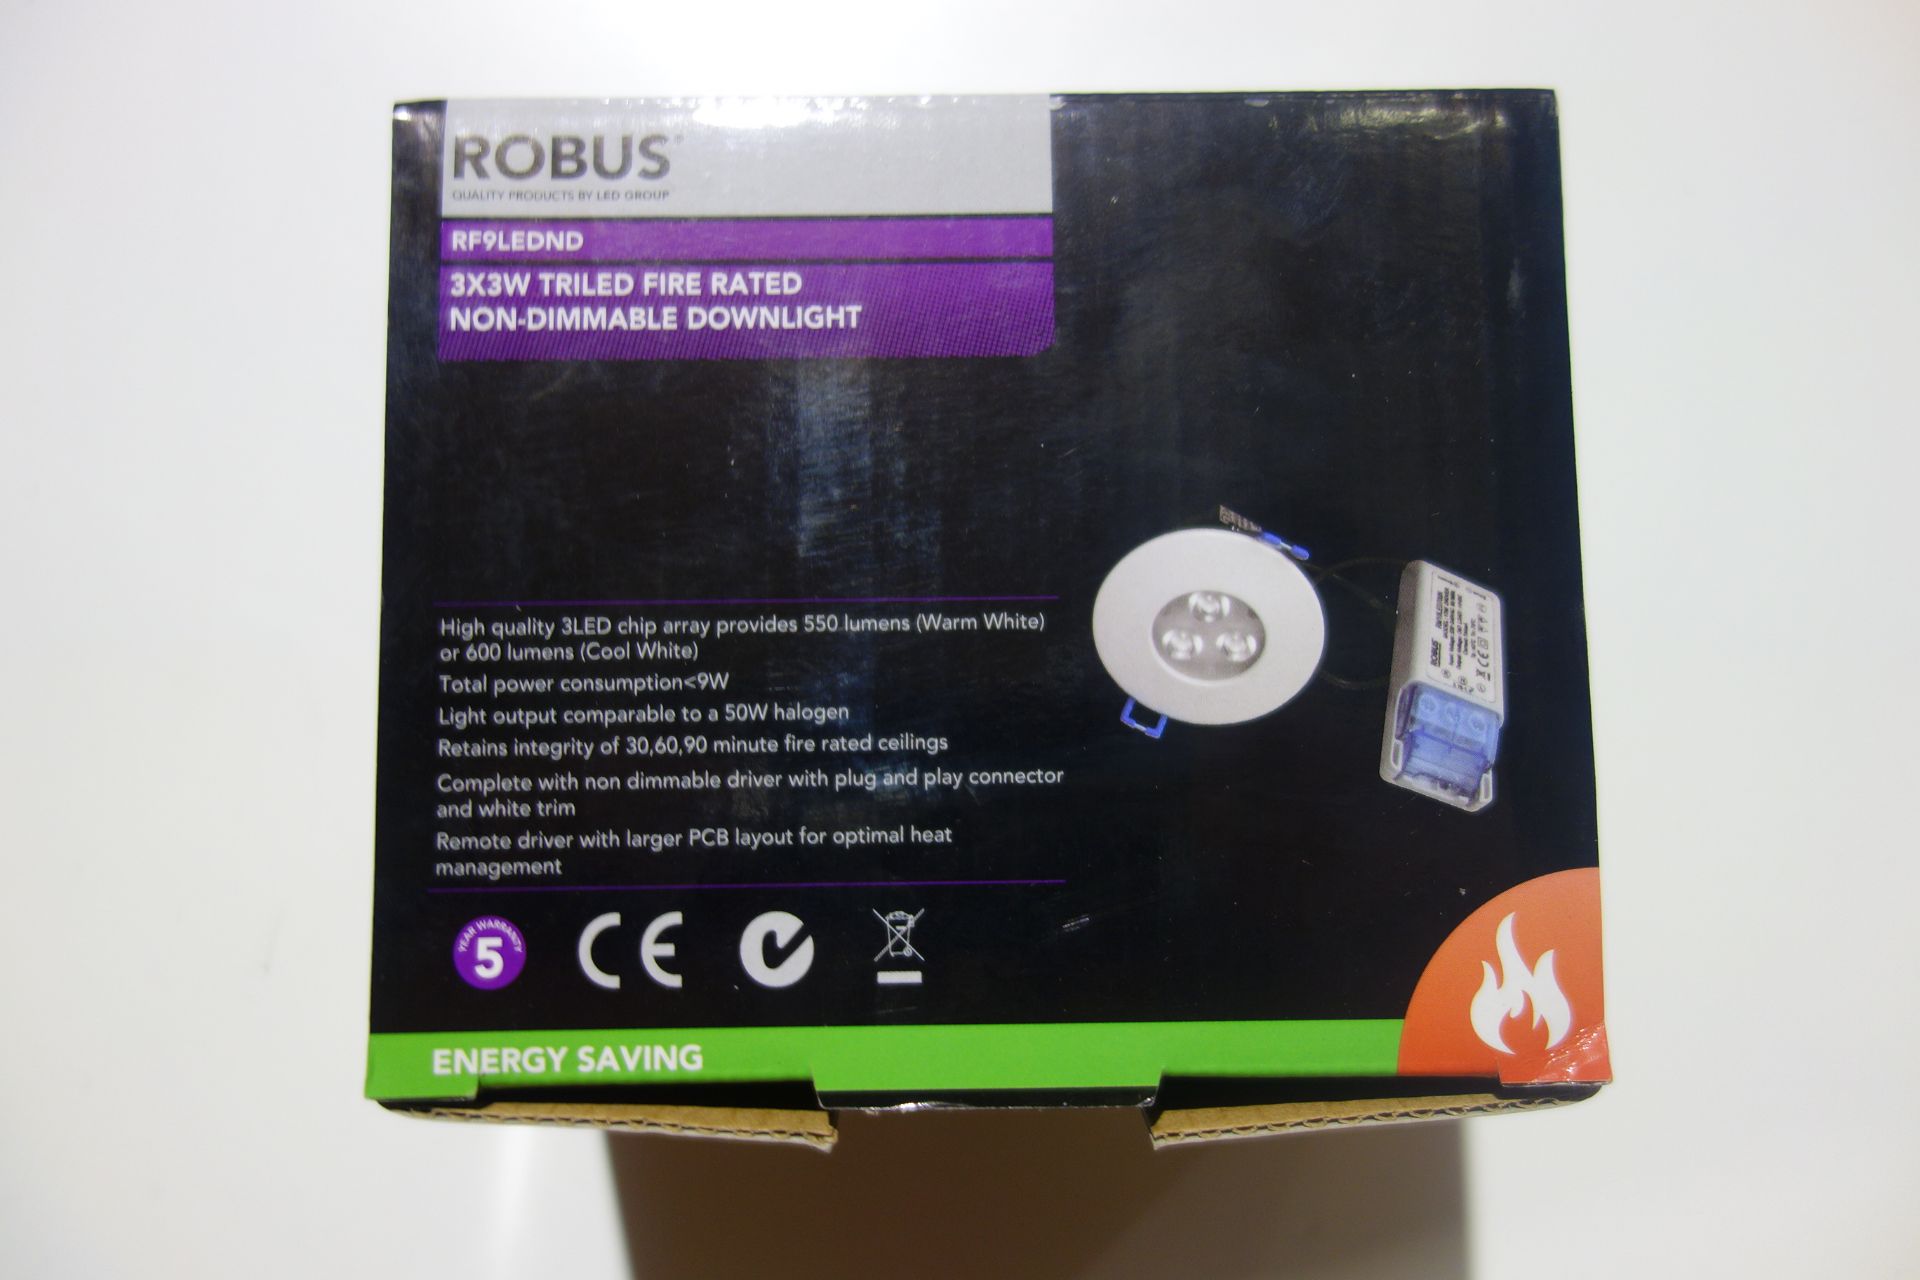 20 X Robus RF9LEDND 3 X 3 W Triled Fire Rated Downlights Non-Dimmable Cool White C/W Driver